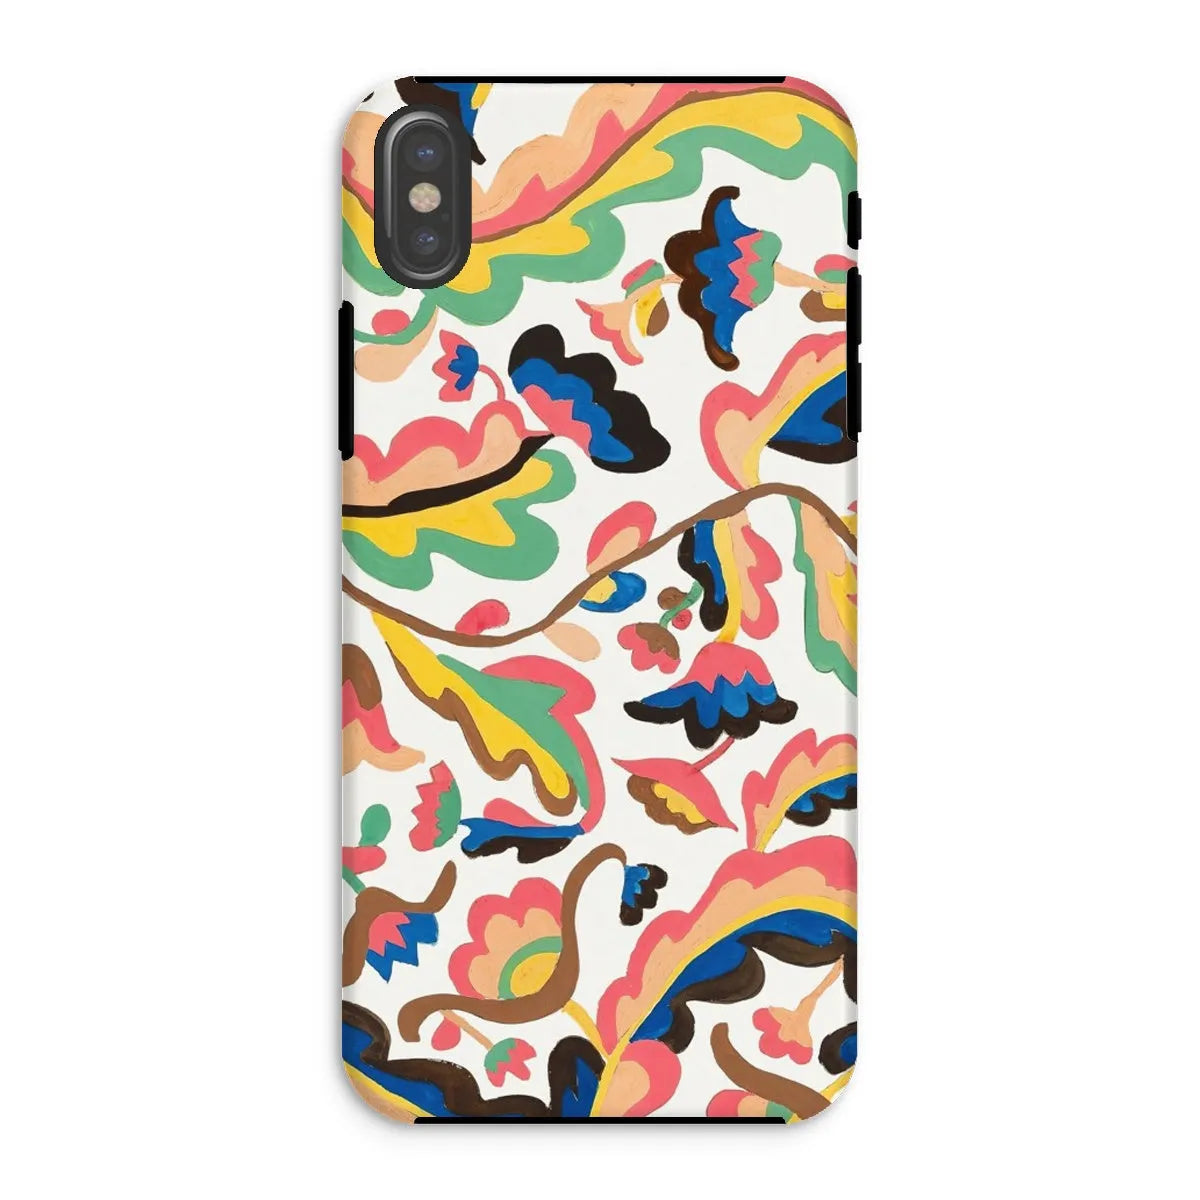 Colcha Floral Aesthetic Pattern Phone Case - Etna Wiswall - Iphone Xs / Matte - Mobile Phone Cases - Aesthetic Art